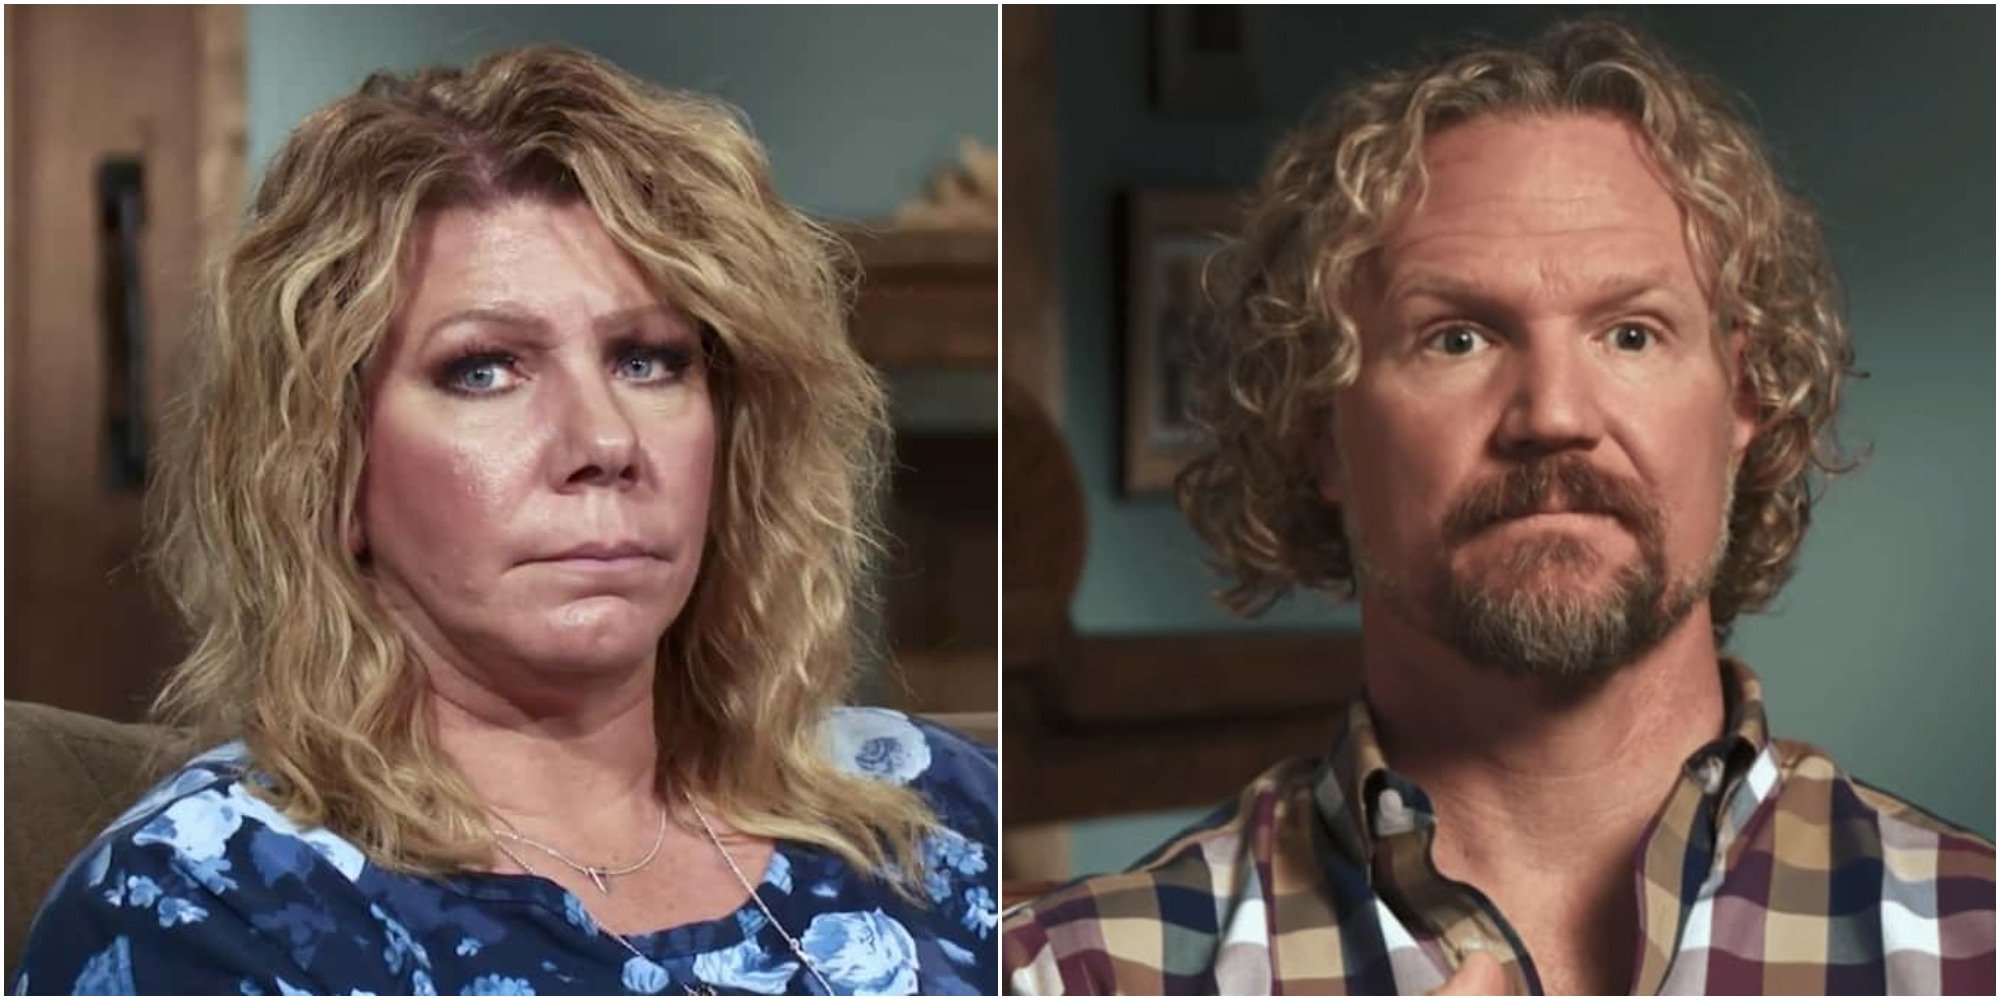 Kody Brown and Meri Brown during confessional interviews for Sister Wives.